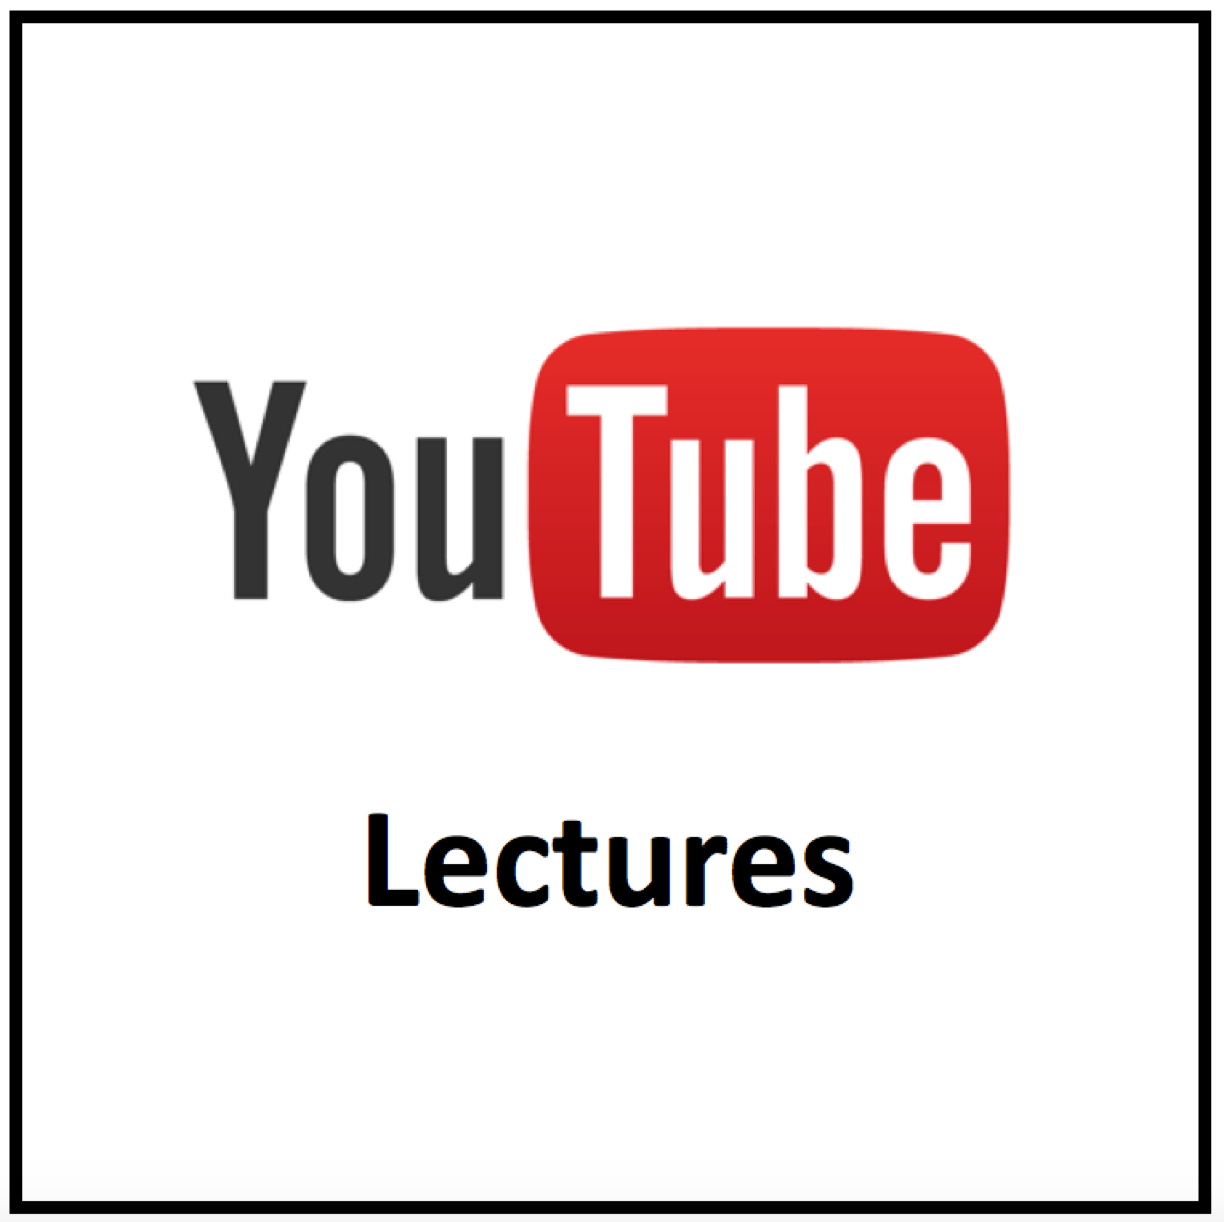 Academic English You Tube academic lecture listenings